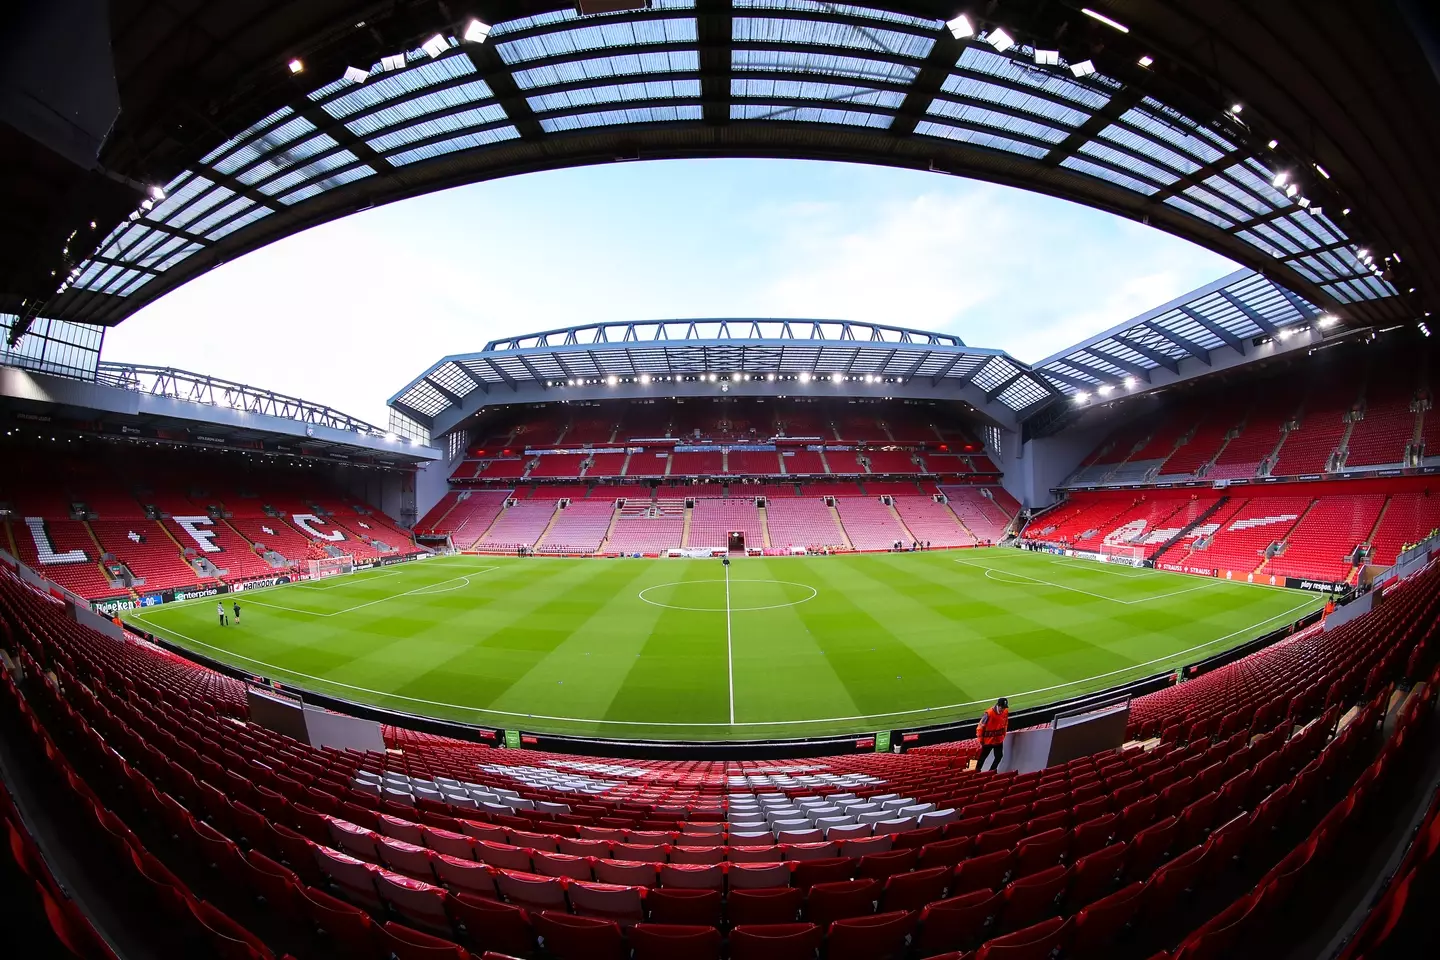 Anfield is set to be expanded in the coming years. (